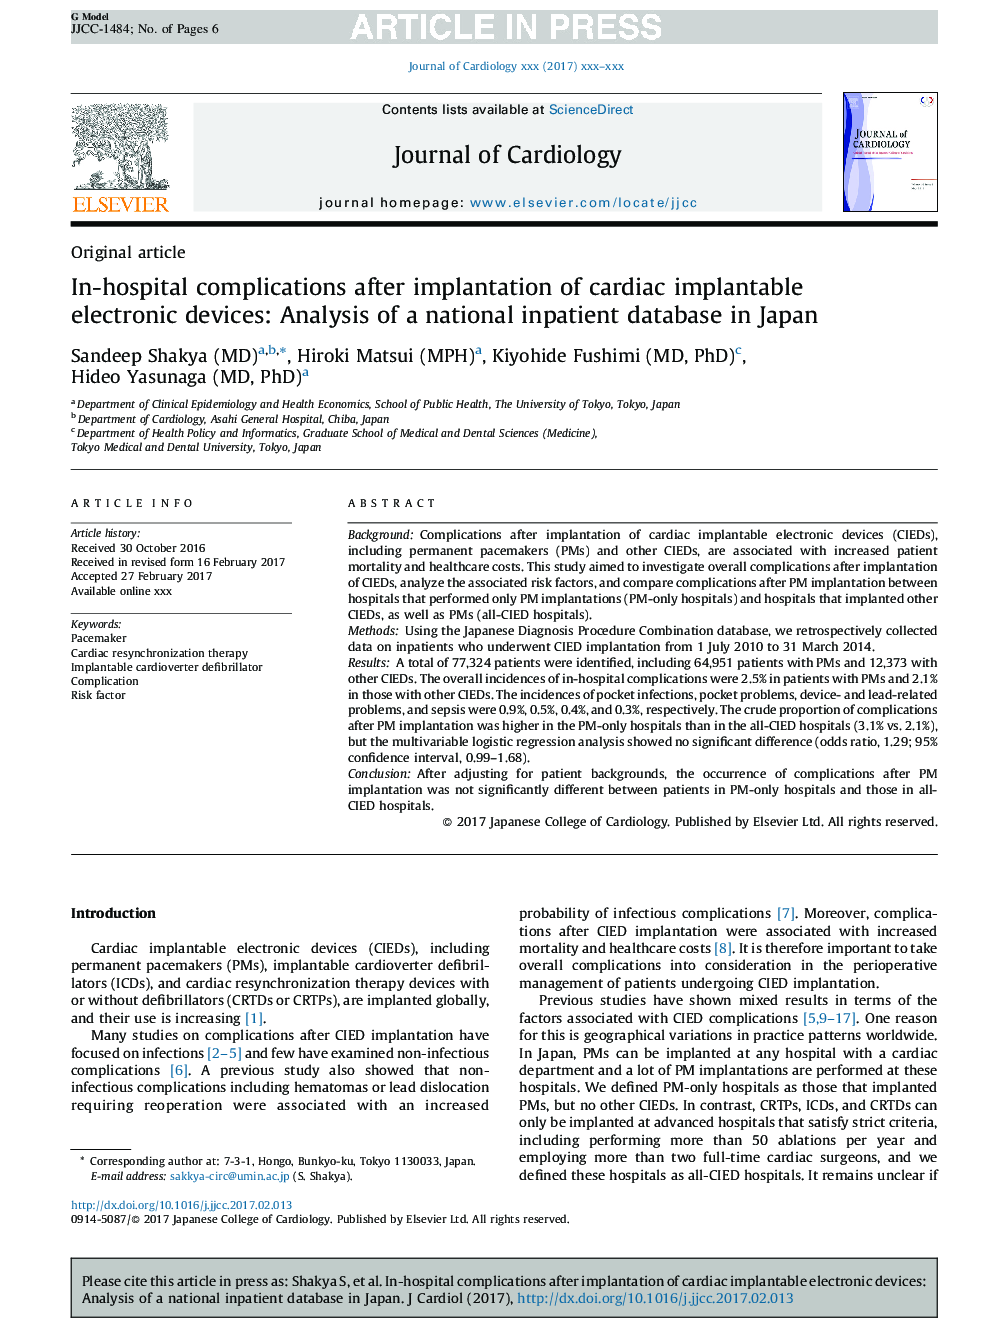 In-hospital complications after implantation of cardiac implantable electronic devices: Analysis of a national inpatient database in Japan